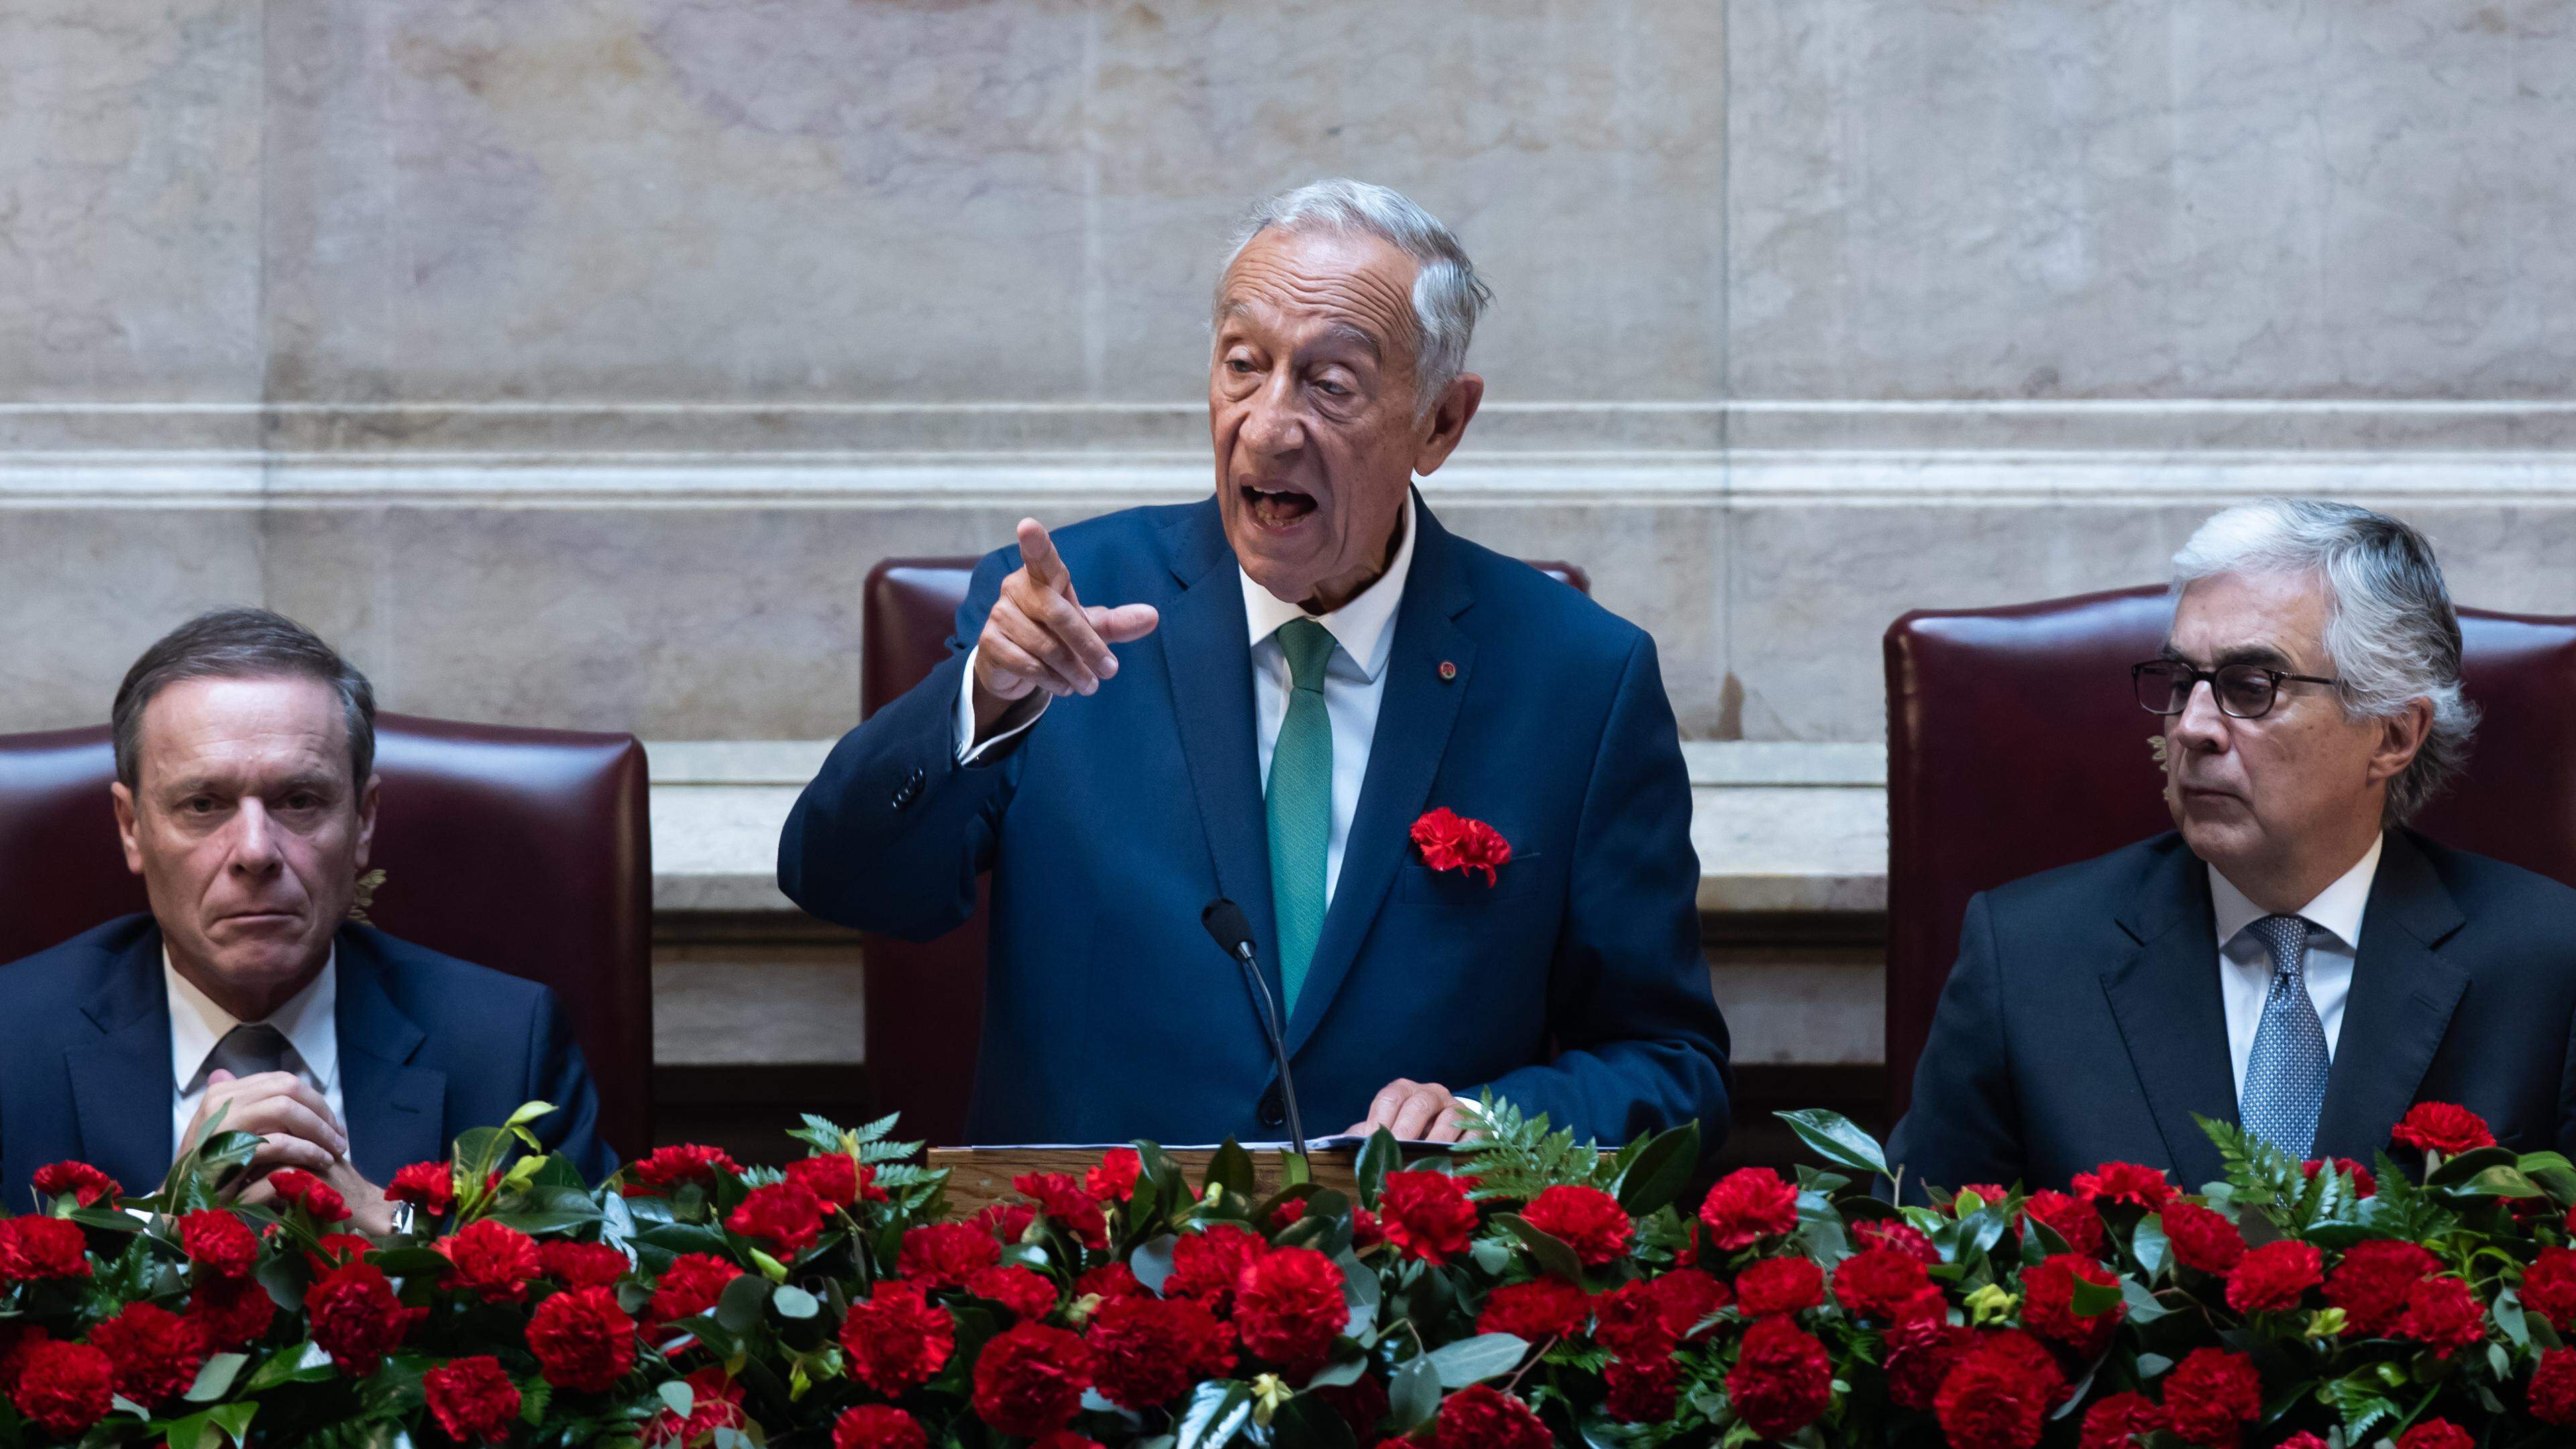 Portuguese President, Marcelo Rebelo de Sousa, delivers a speech during the solemn comemorative session at the Portuguese parliament in Lisbon, Portugal, 25 April 2024. Portugal celebrates the 50th anniversary of the Carnation Revolution that ended the authoritarian regime of Estado Novo (New State) that ruled the country between 1926 to 1974. JOSE SENA GOULAO/LUSA